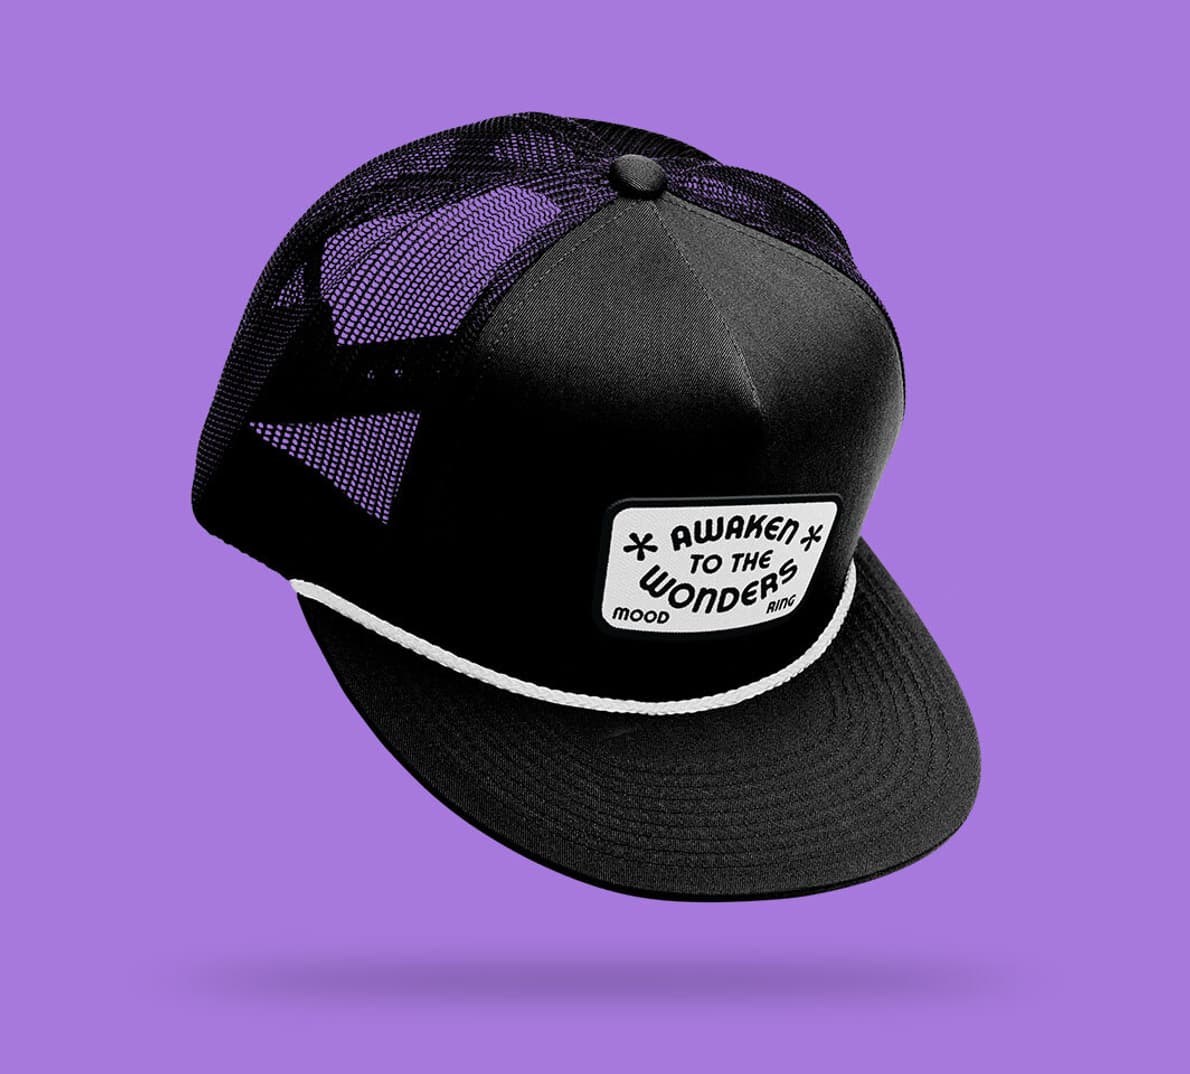 A floating hat on a purple background with a patch that reads "Awaken to the Wonders"